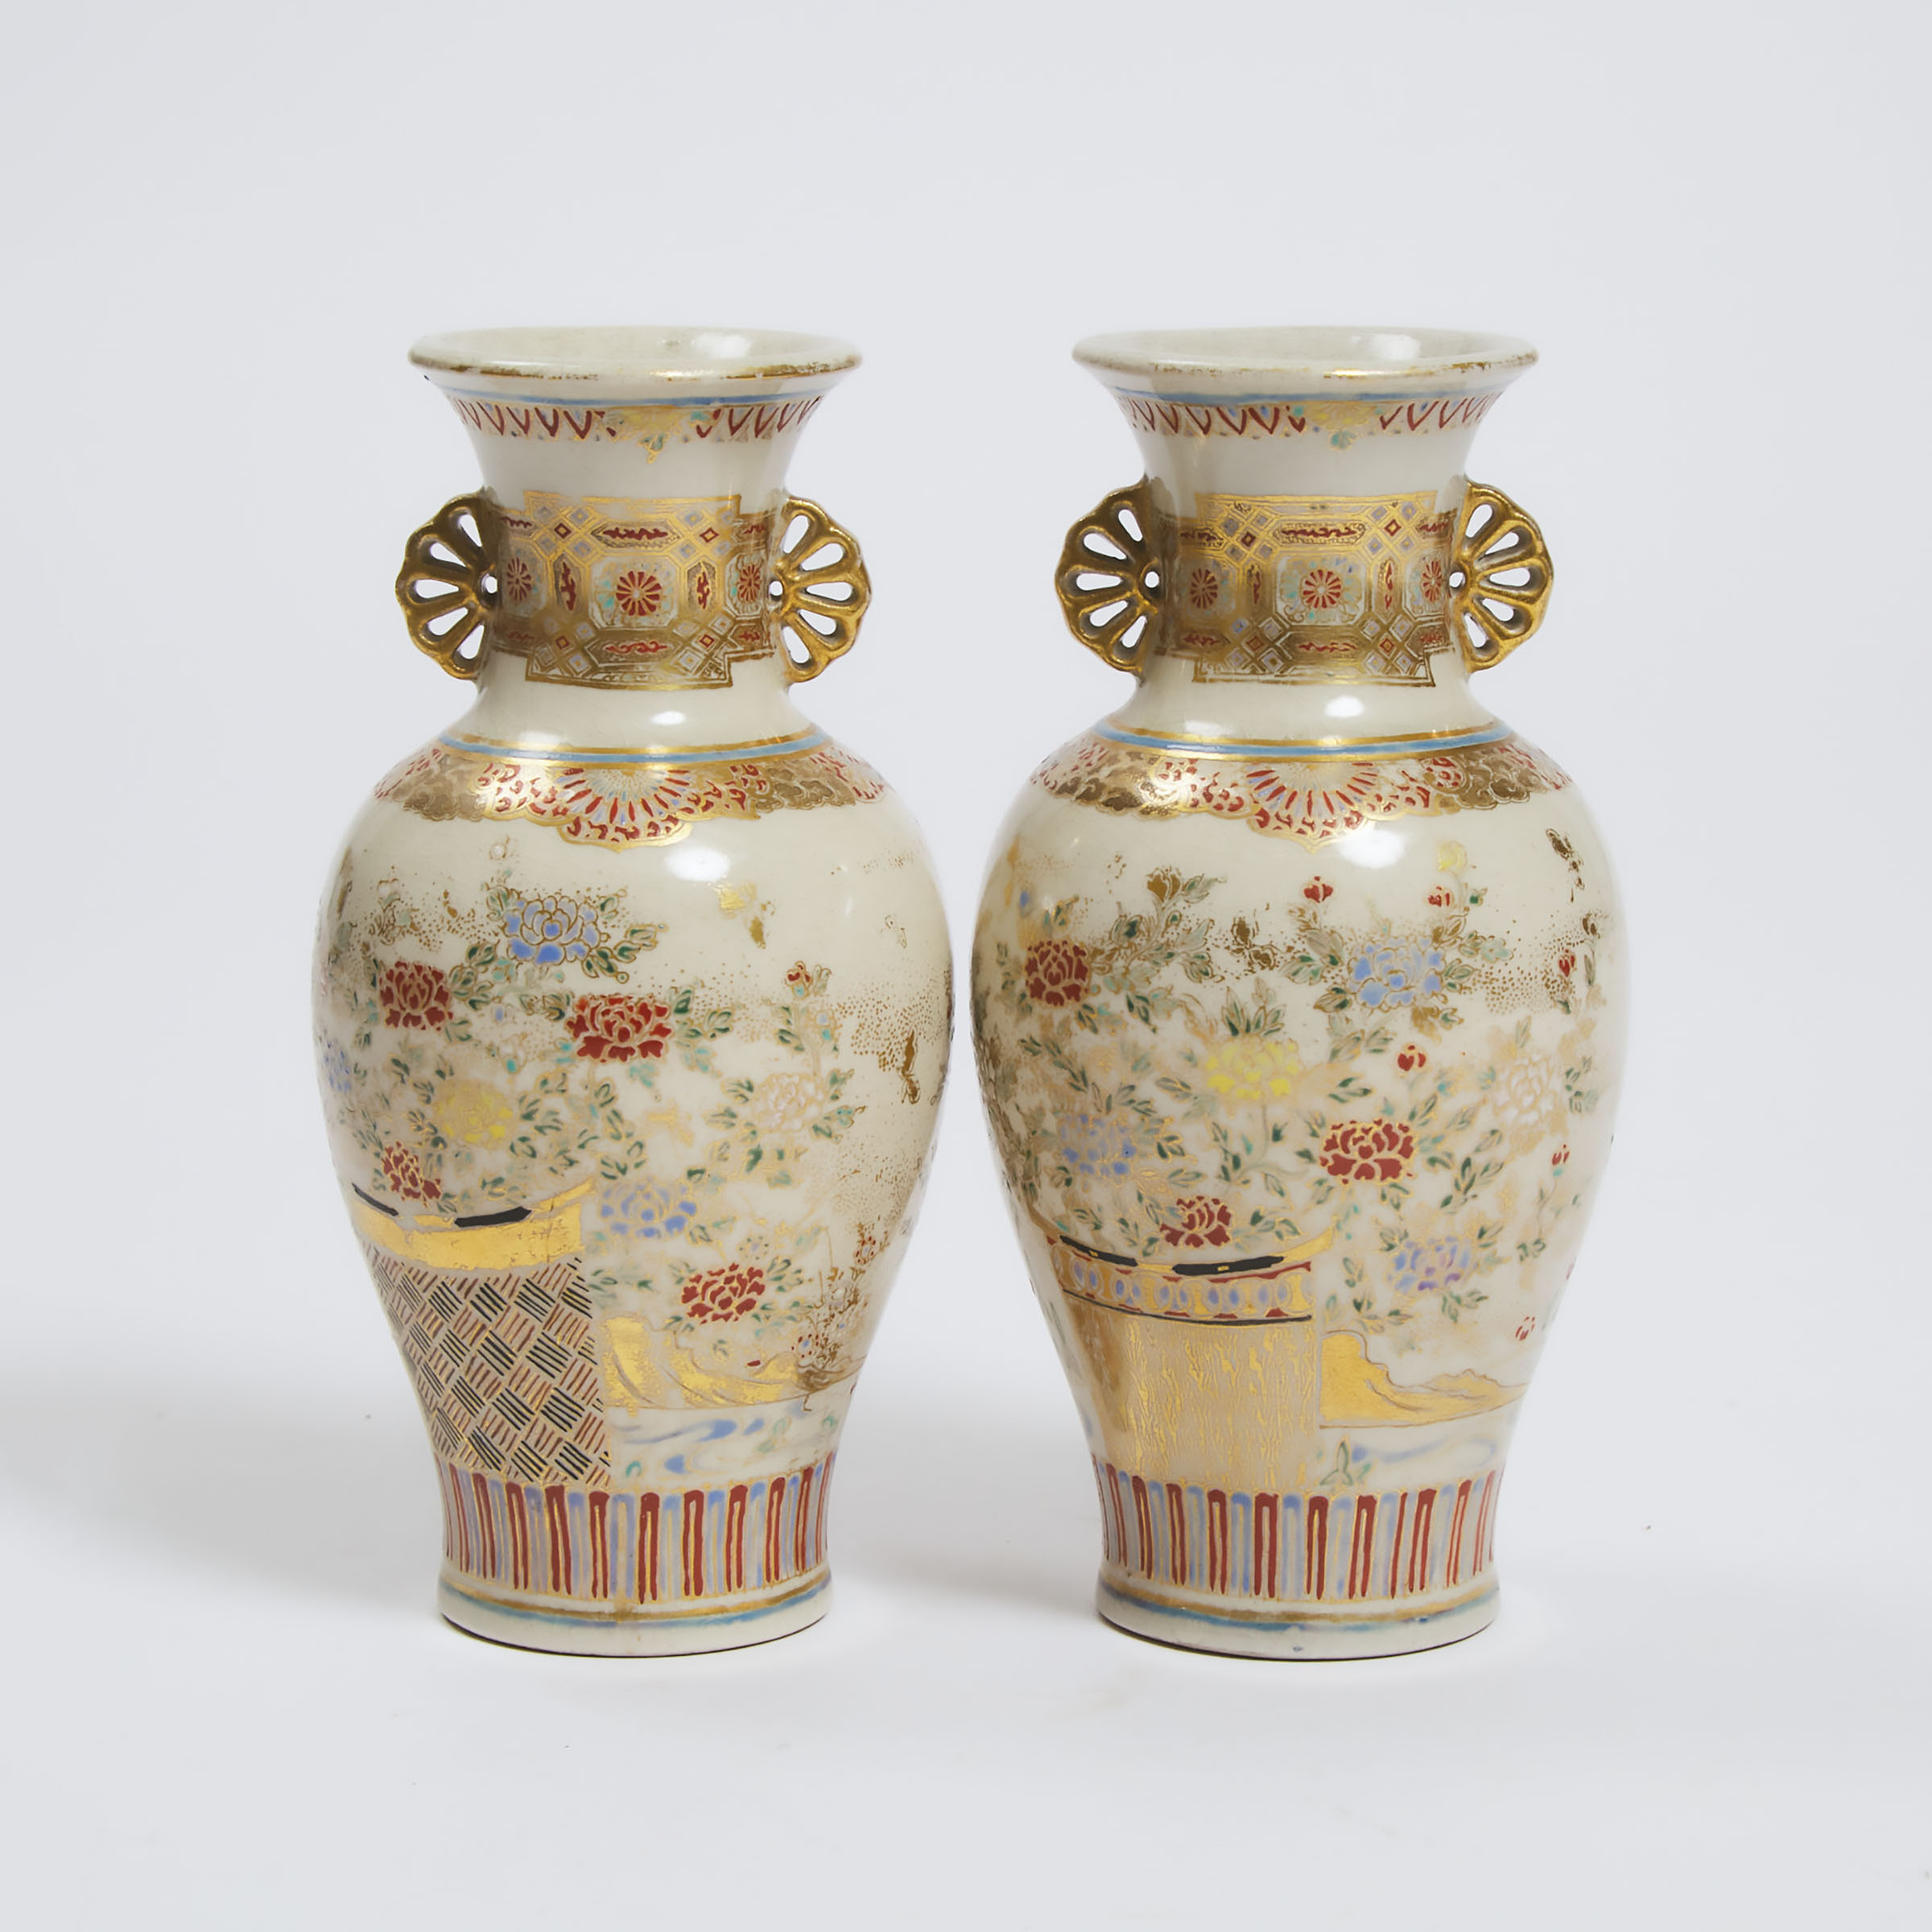 A Pair of Small Satsuma Vases, Meiji Period, height 5.9 in — 15 cm (2 Pieces)